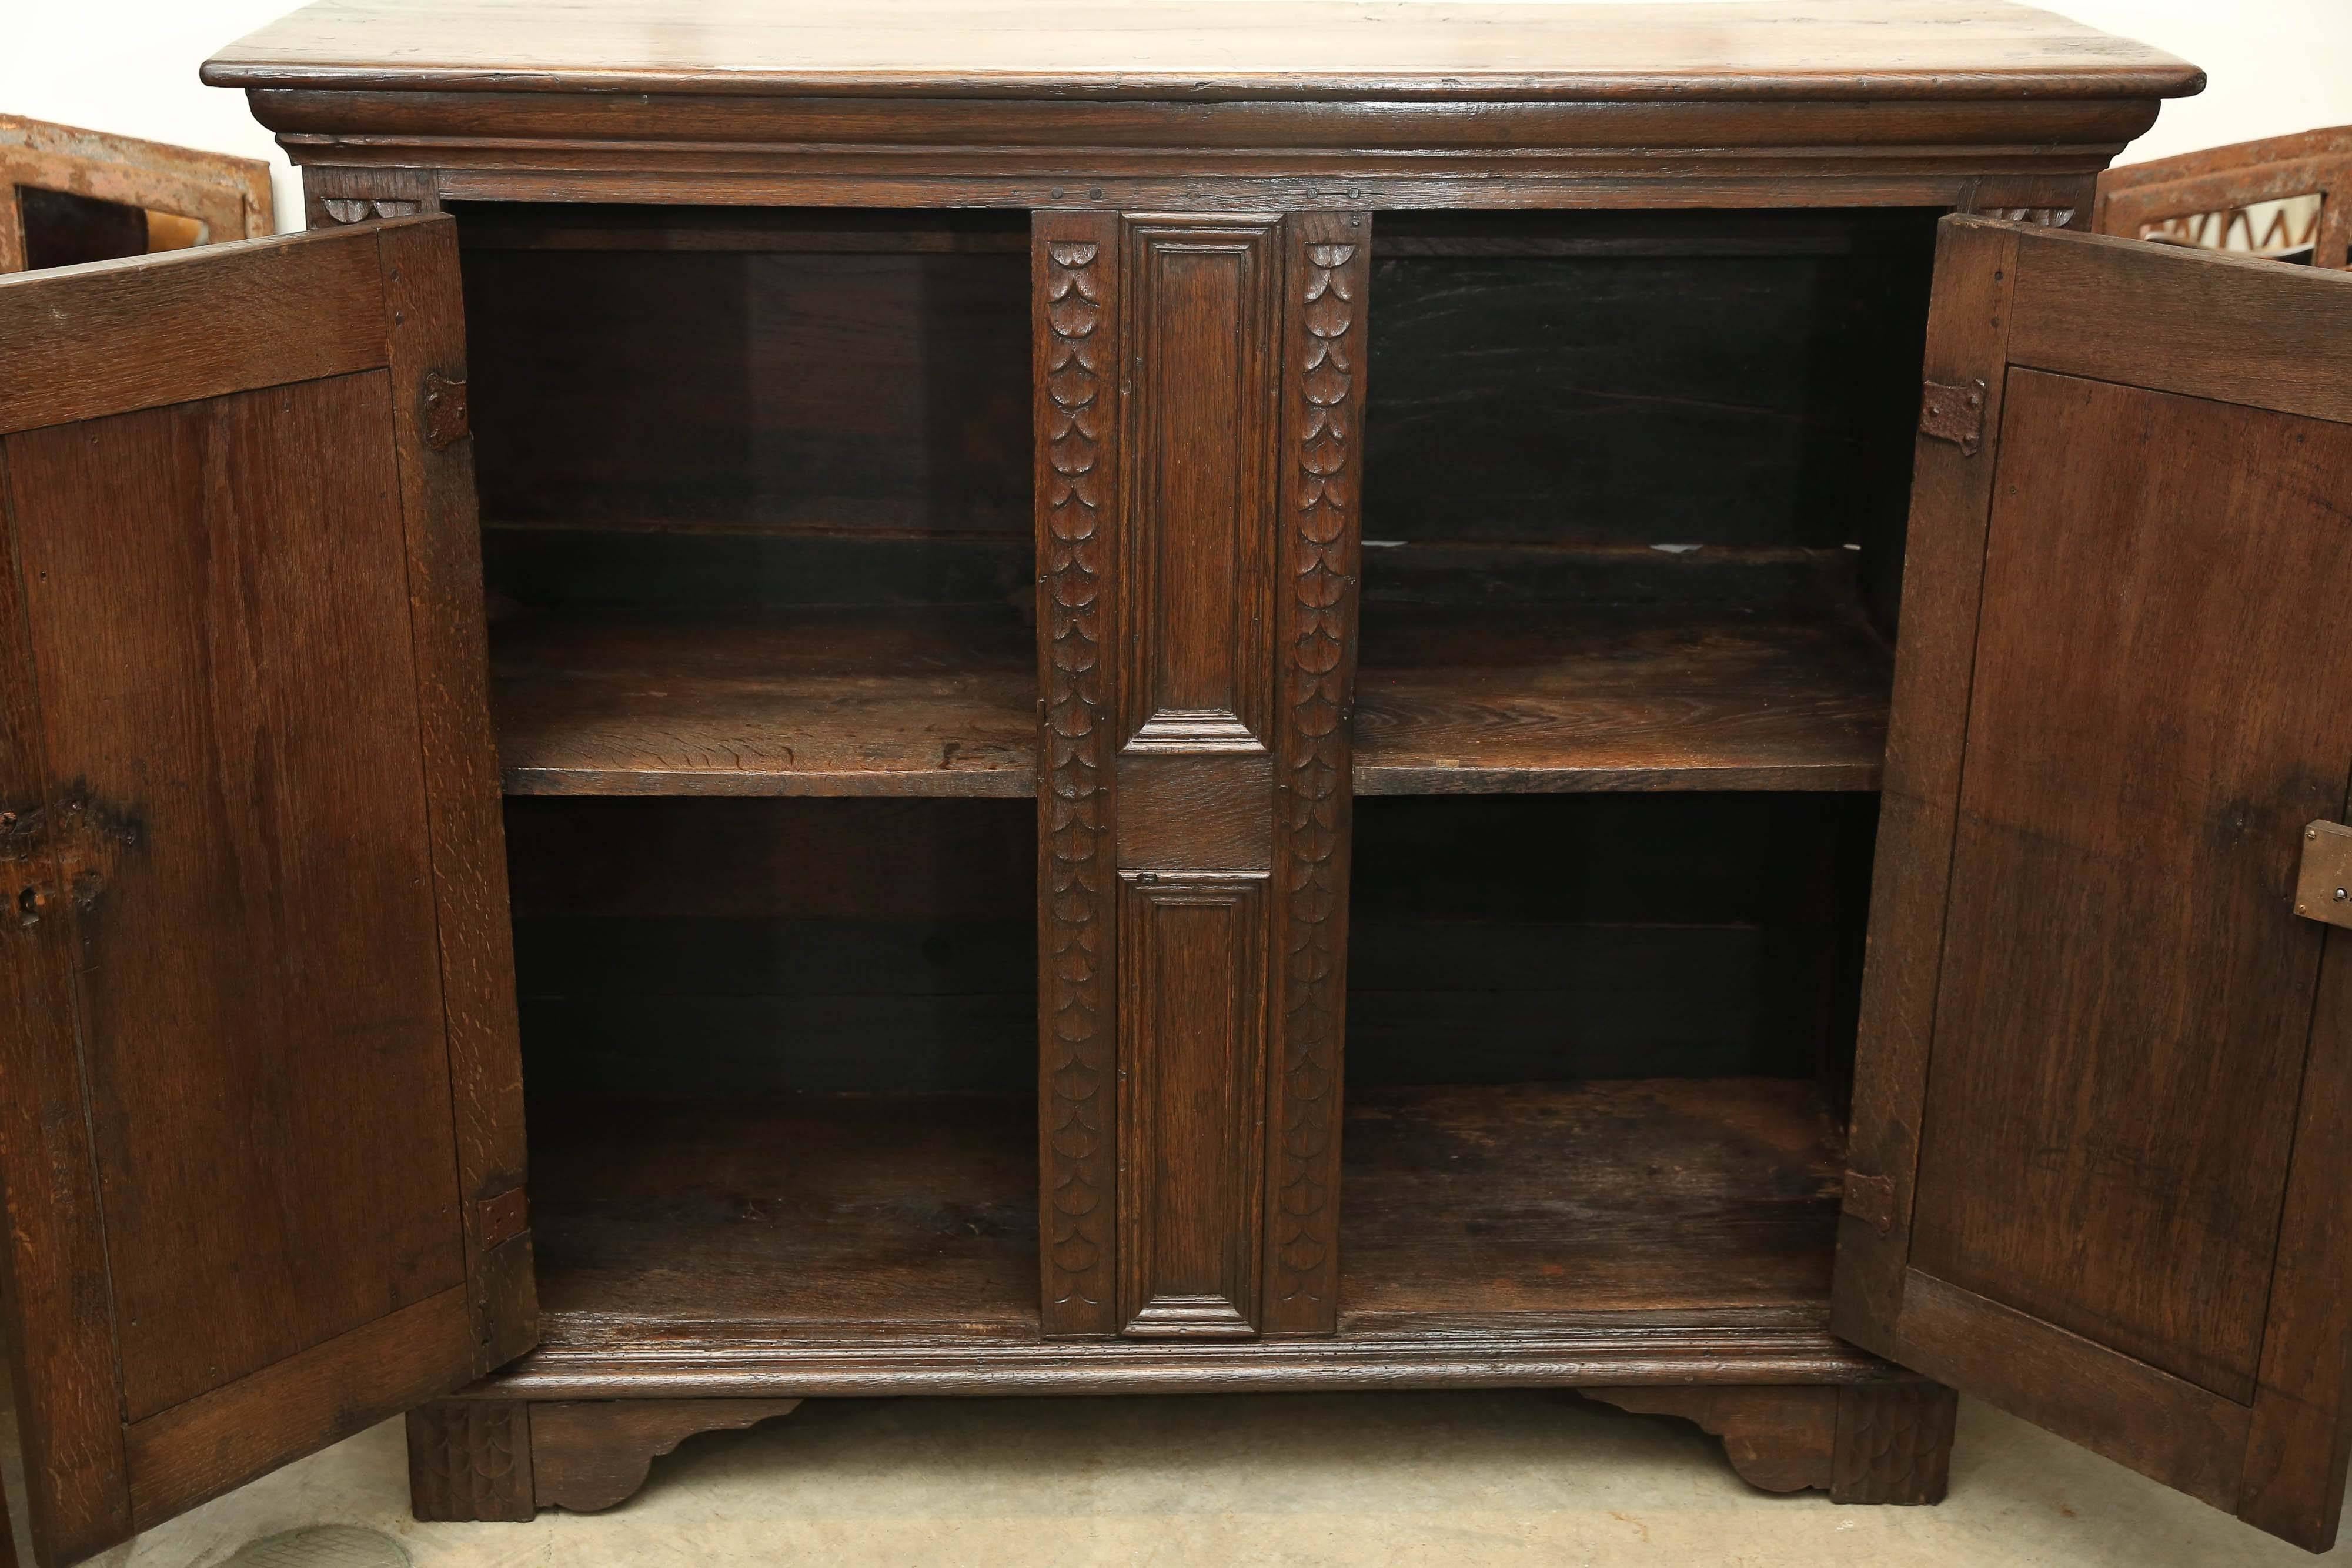 17th century oak cabinet with carved vertical detail bordering two doors. Bracket feet.